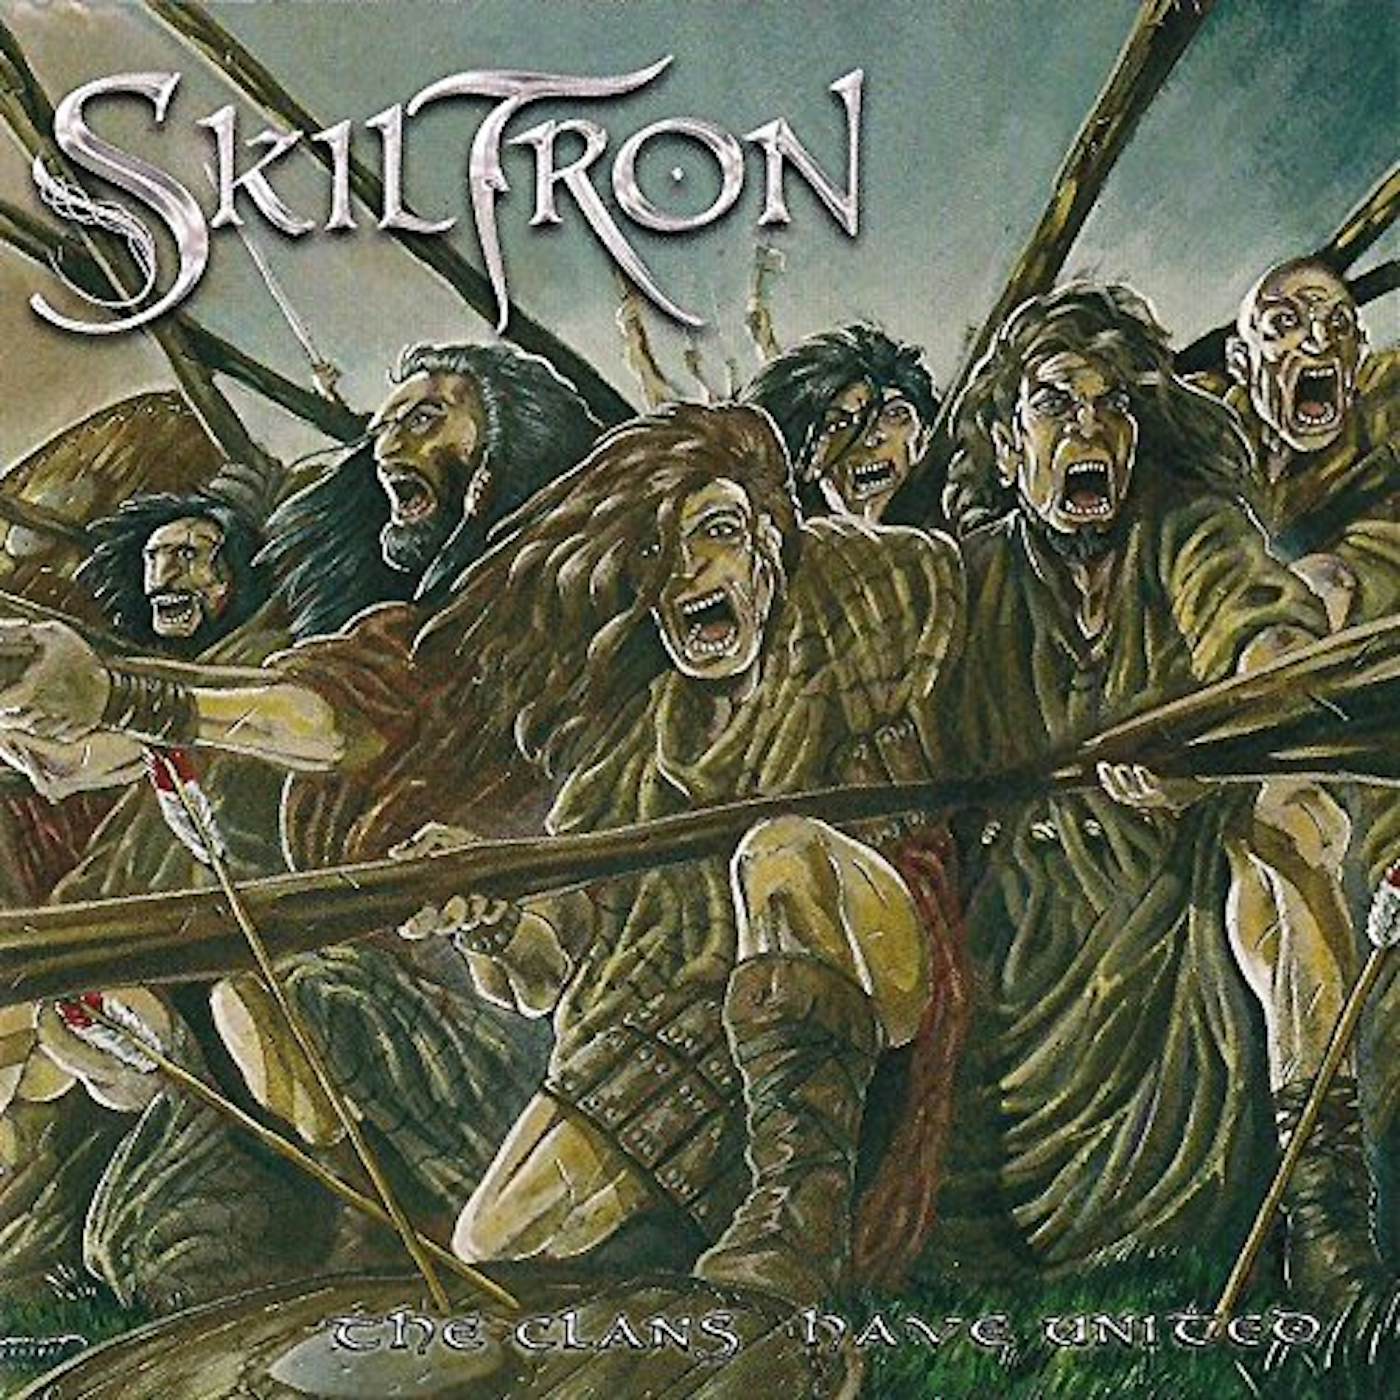 Skiltron CLANS HAVE UNITED CD